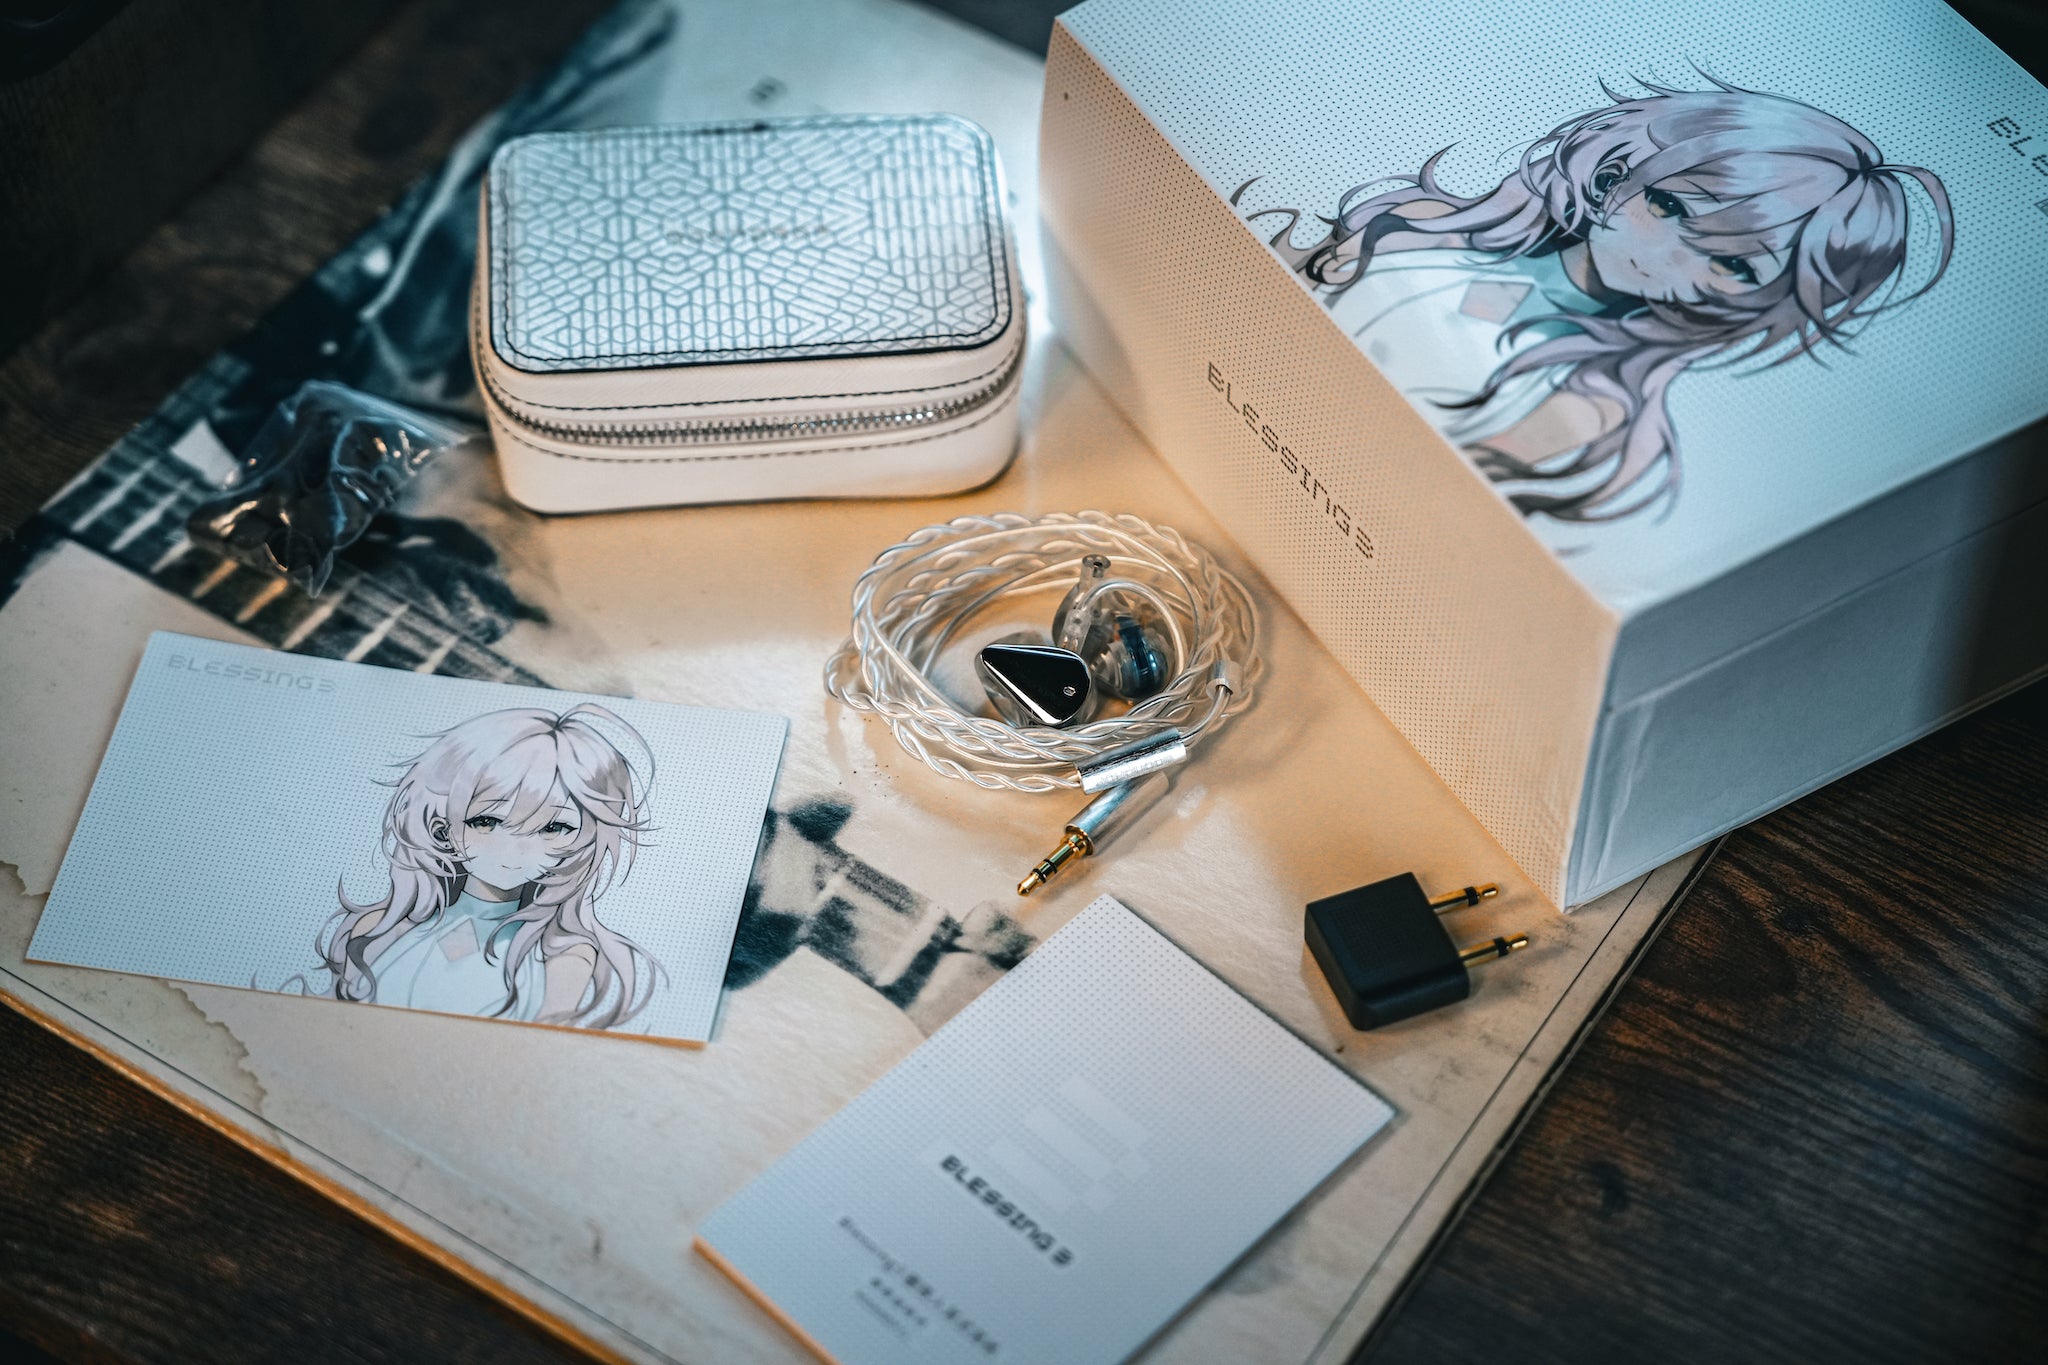 Moondrop Blessing 3 earphone, retail box and all included accessories